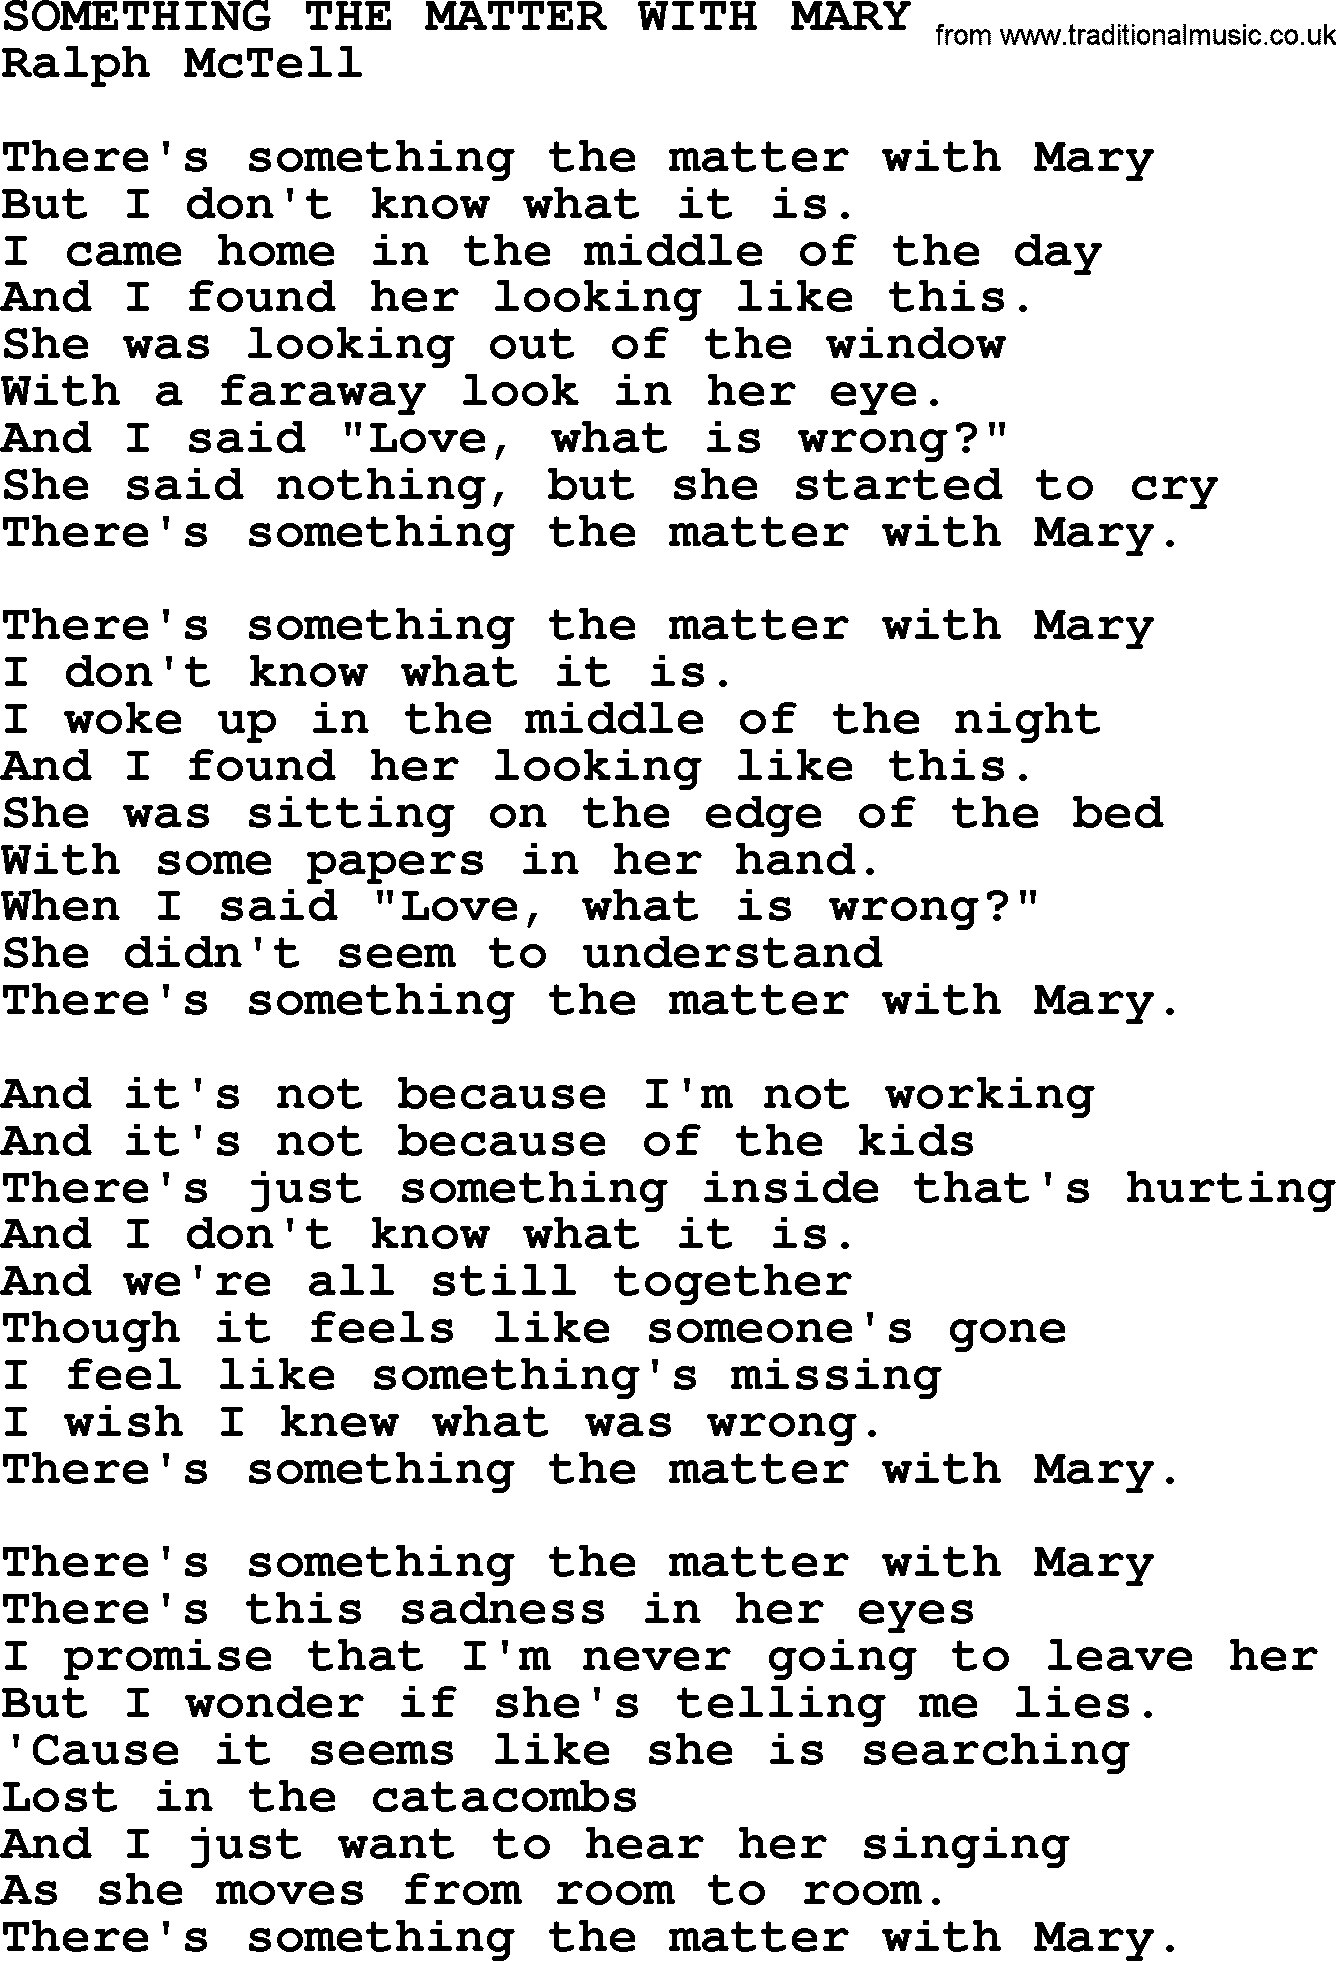 Ralph McTell Song: Something The Matter With Mary, lyrics